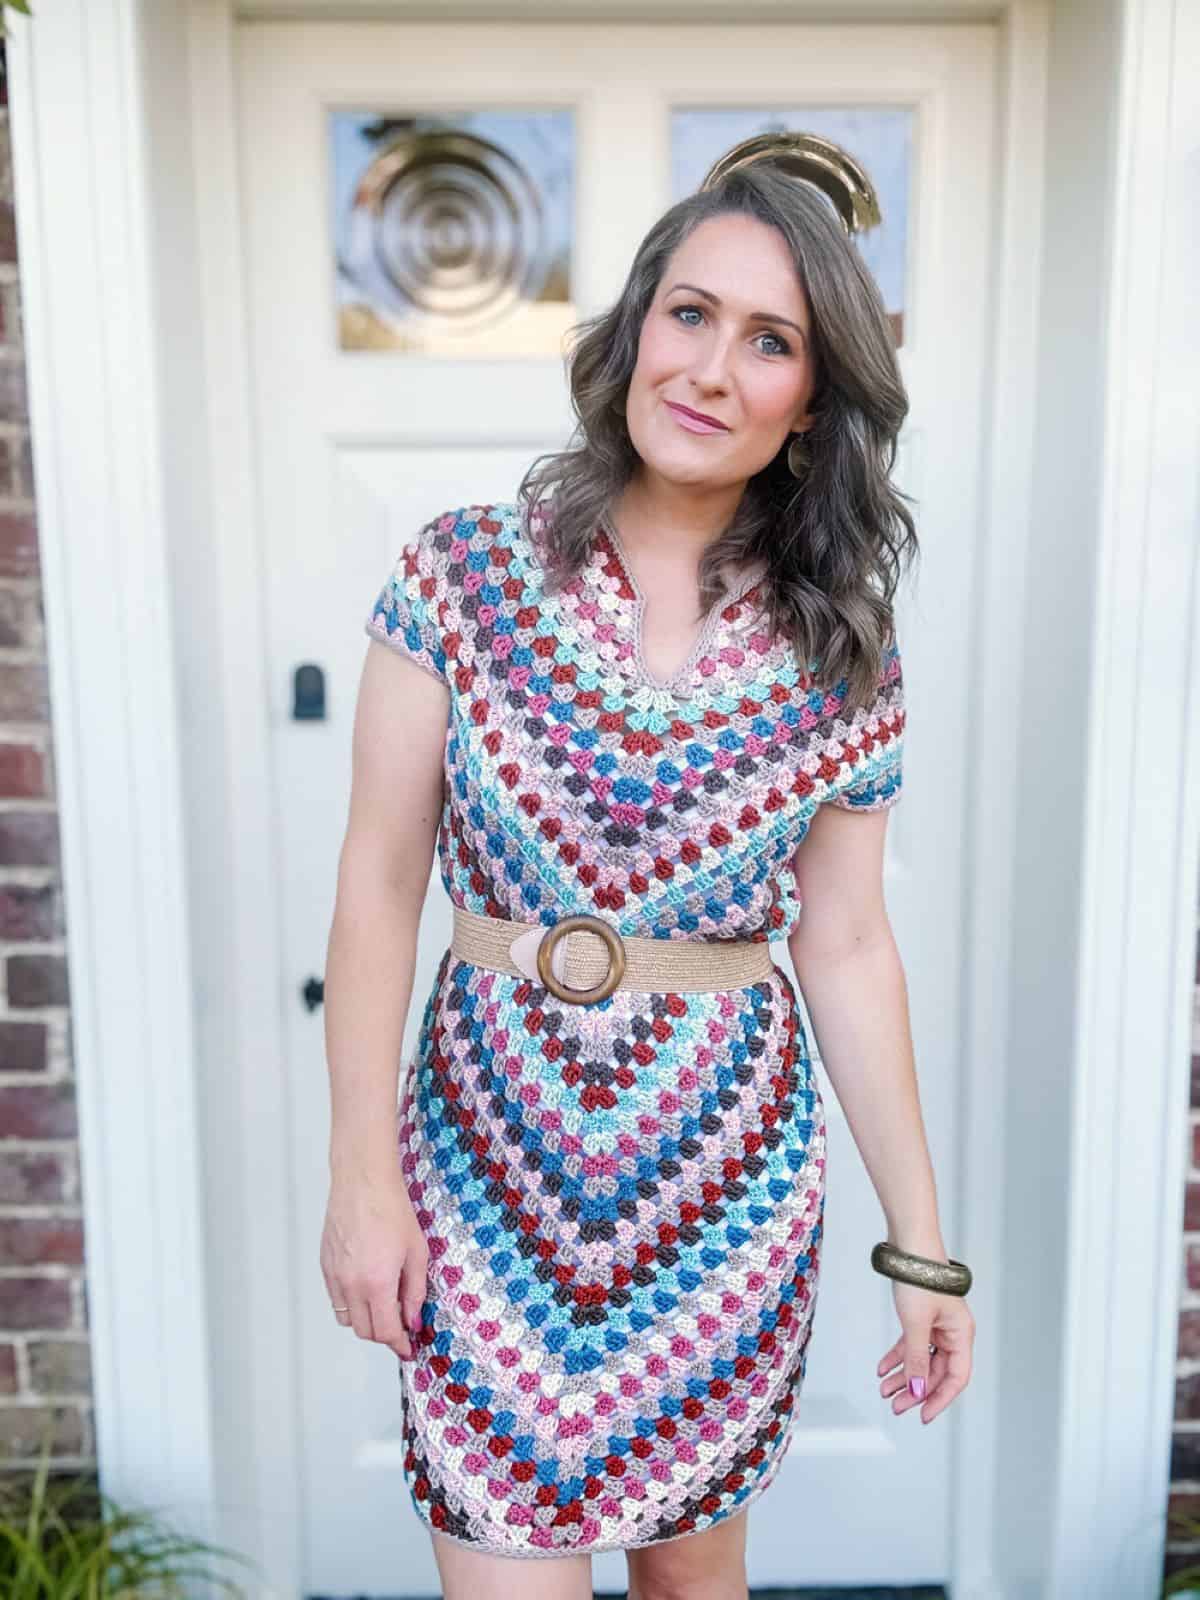 A woman stands in front of a door, wearing a colorful, patterned crochet dress with a beige belt and bracelet.